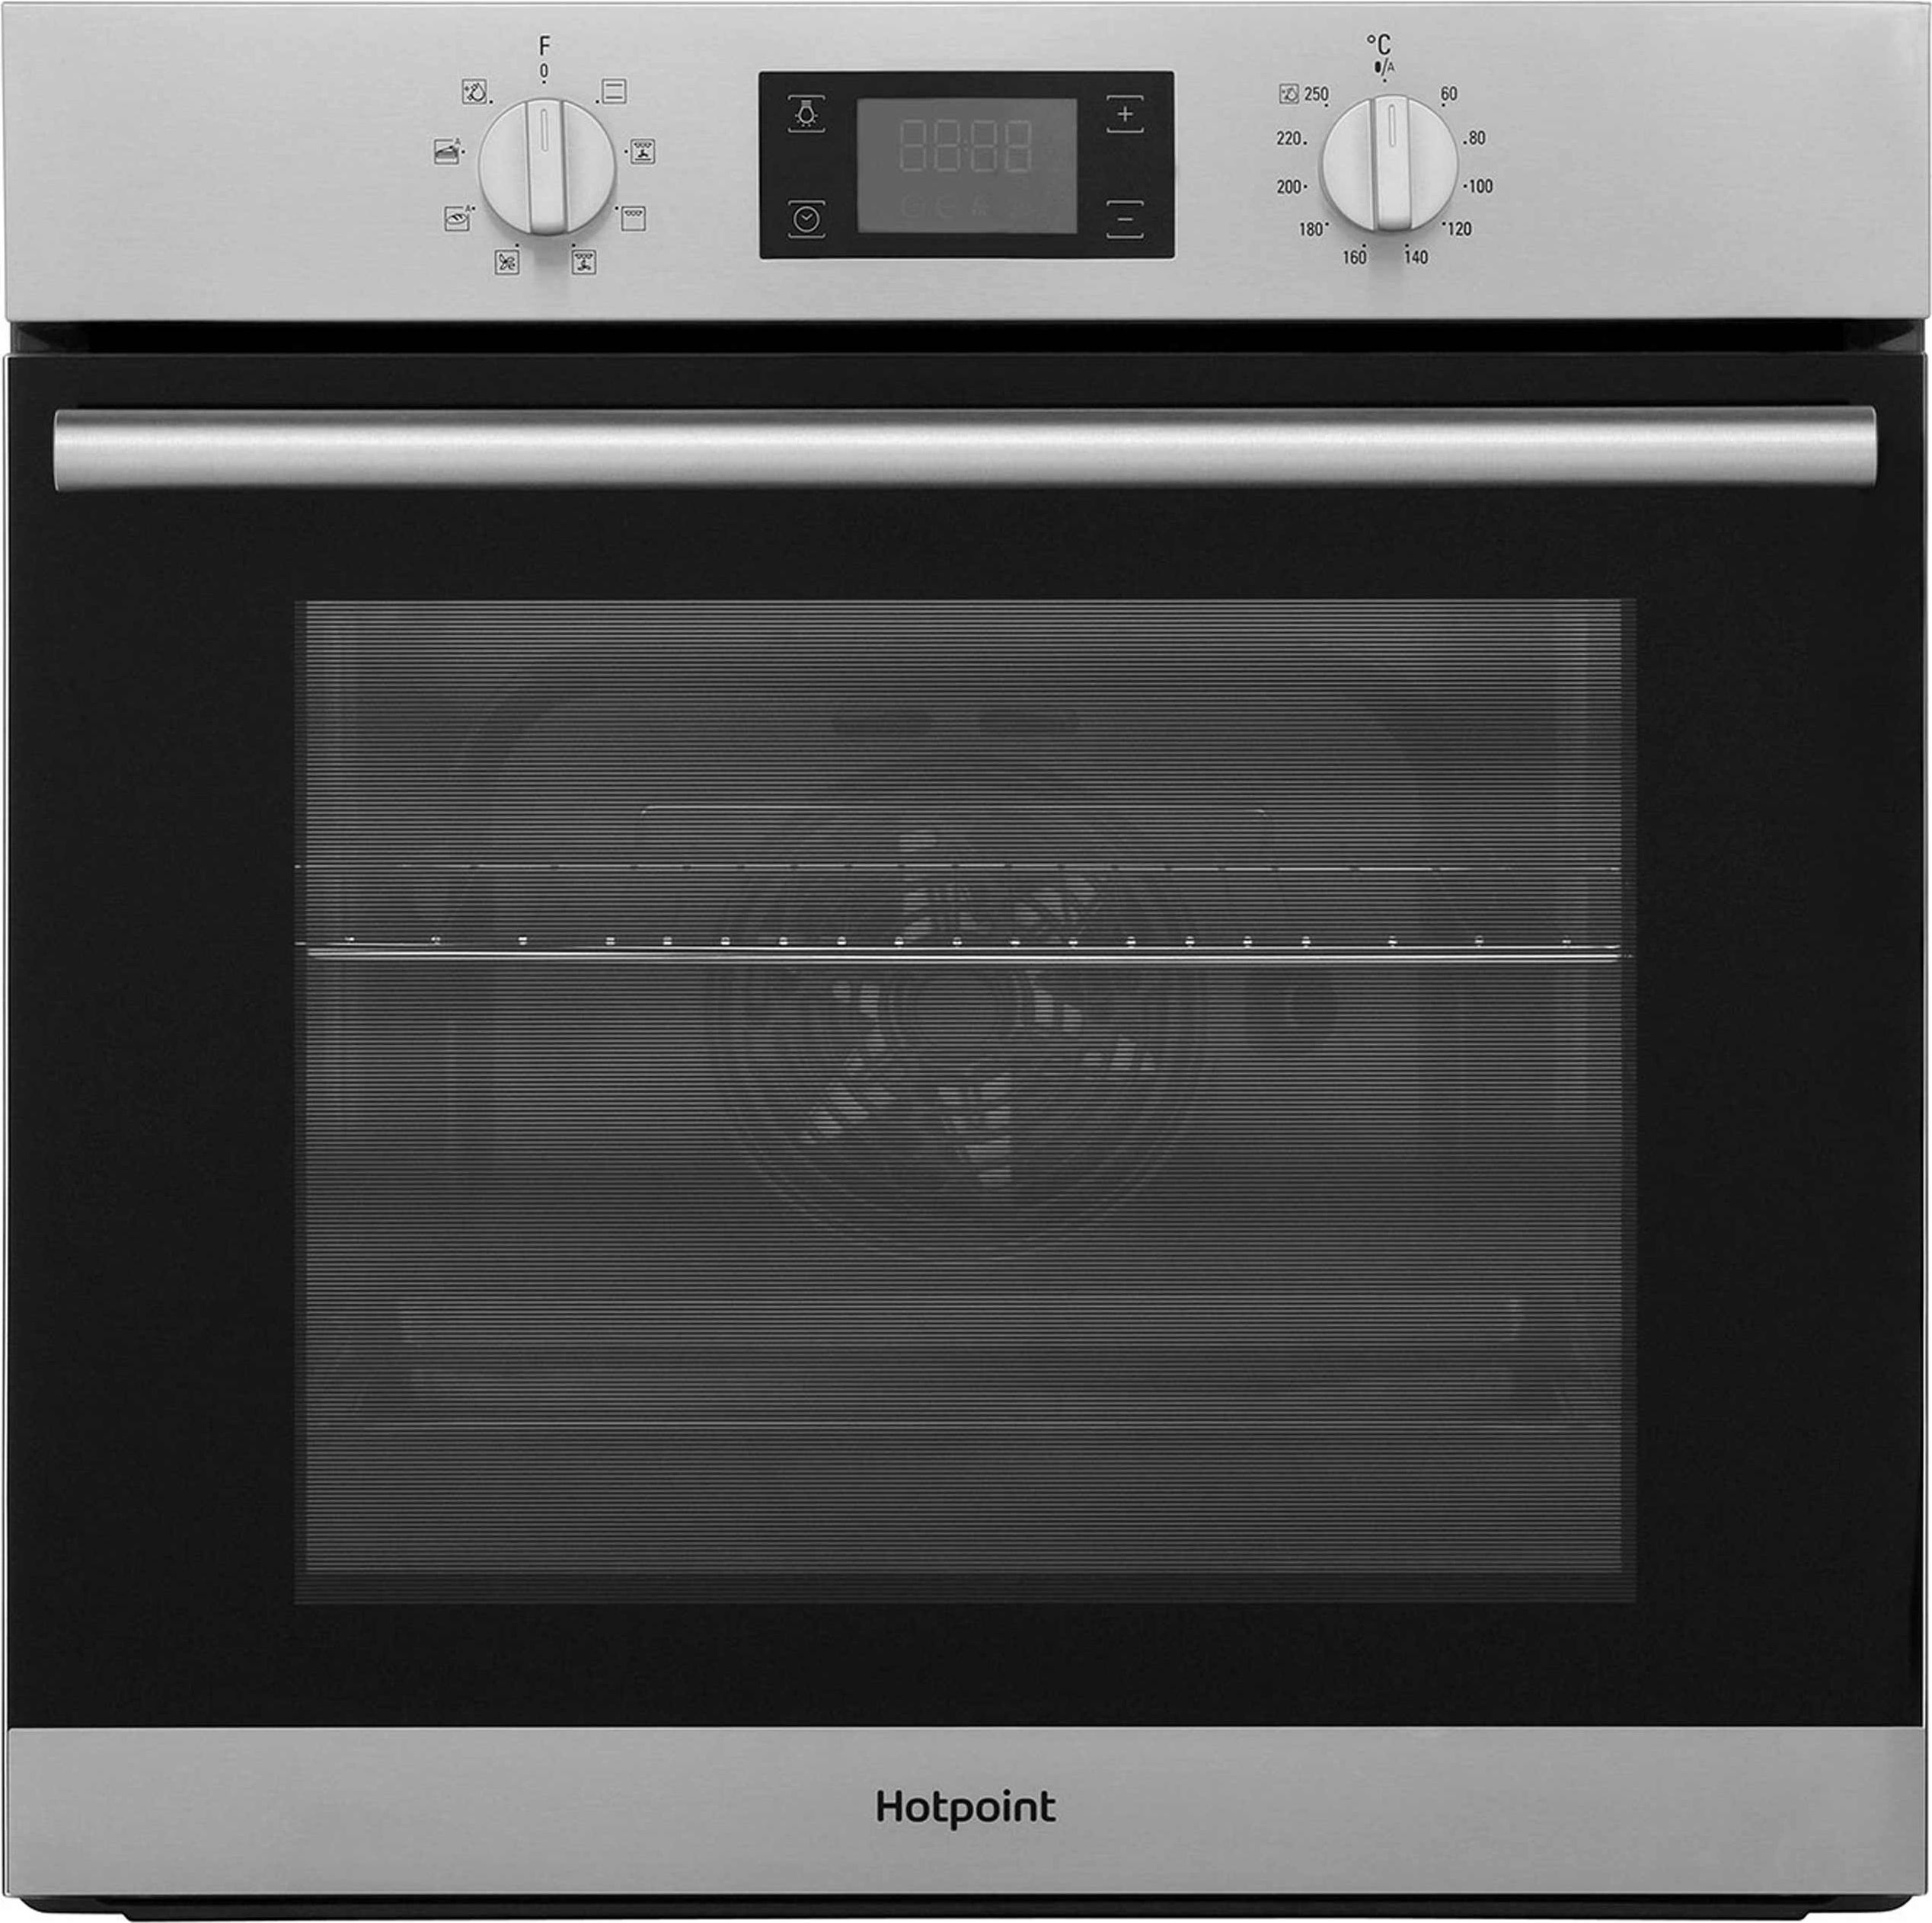 Hotpoint Class 2 SA2540HIX Built In Electric Single Oven - Stainless Steel - A Rated, Stainless Steel